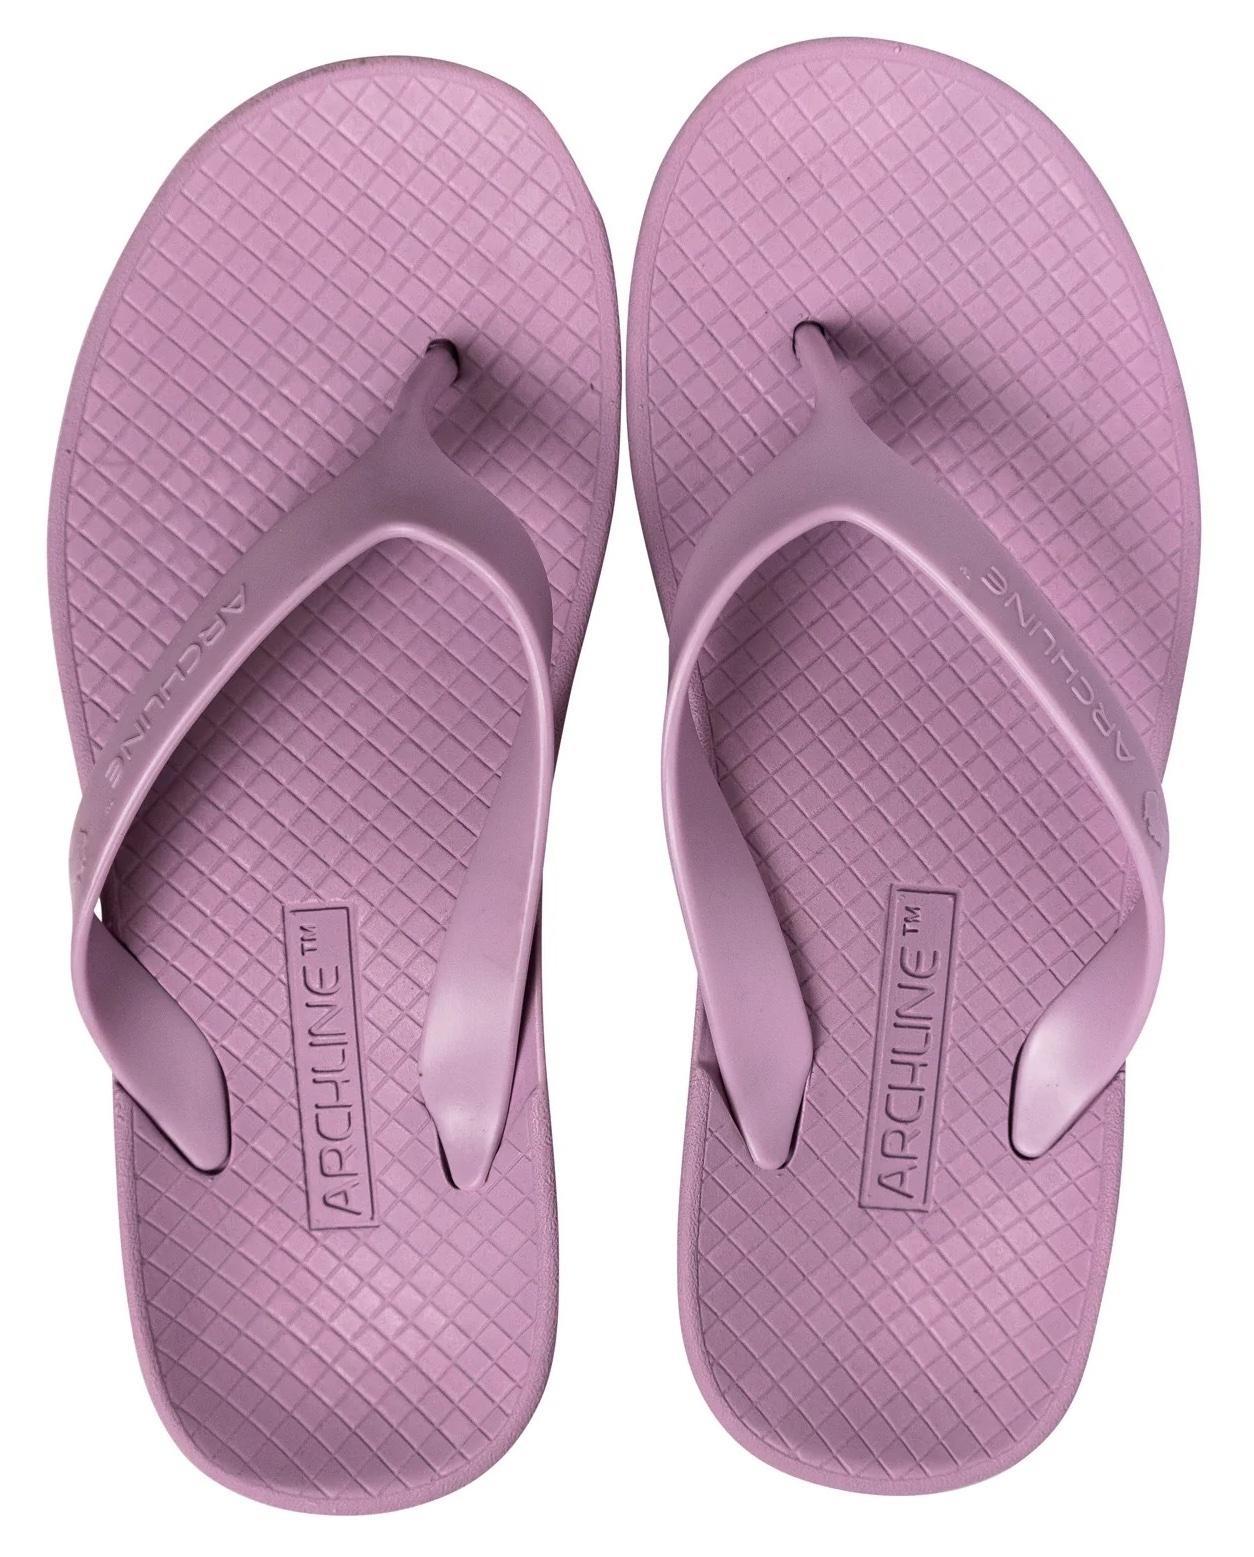 ARCHLINE Orthotic Flip Flops Thongs Arch Support Shoes Footwear - Lilac Purple - EUR 36